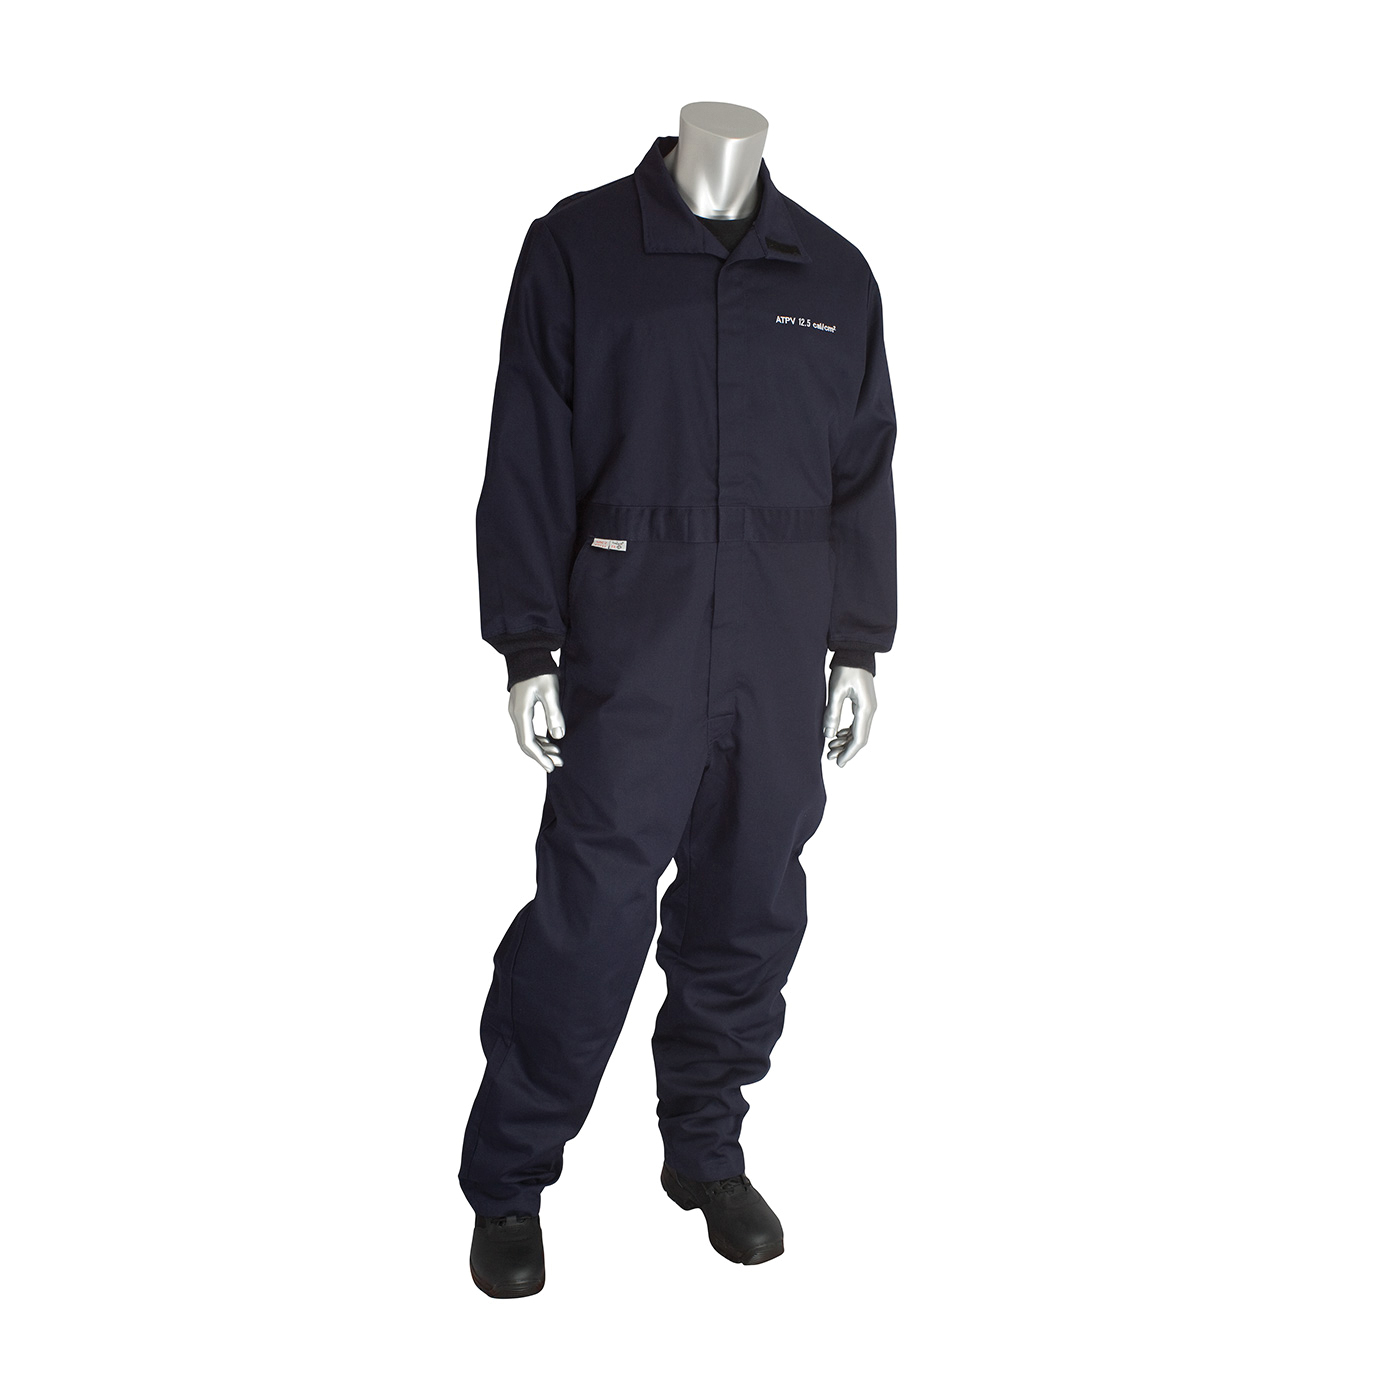 PIP® 9100-2170D/5X Flame Resistant Coverall, 5XL, Navy, 90% Cotton/10% Nylon/FR Twill Weave, 64 to 66 in Chest, 32 in L Inseam